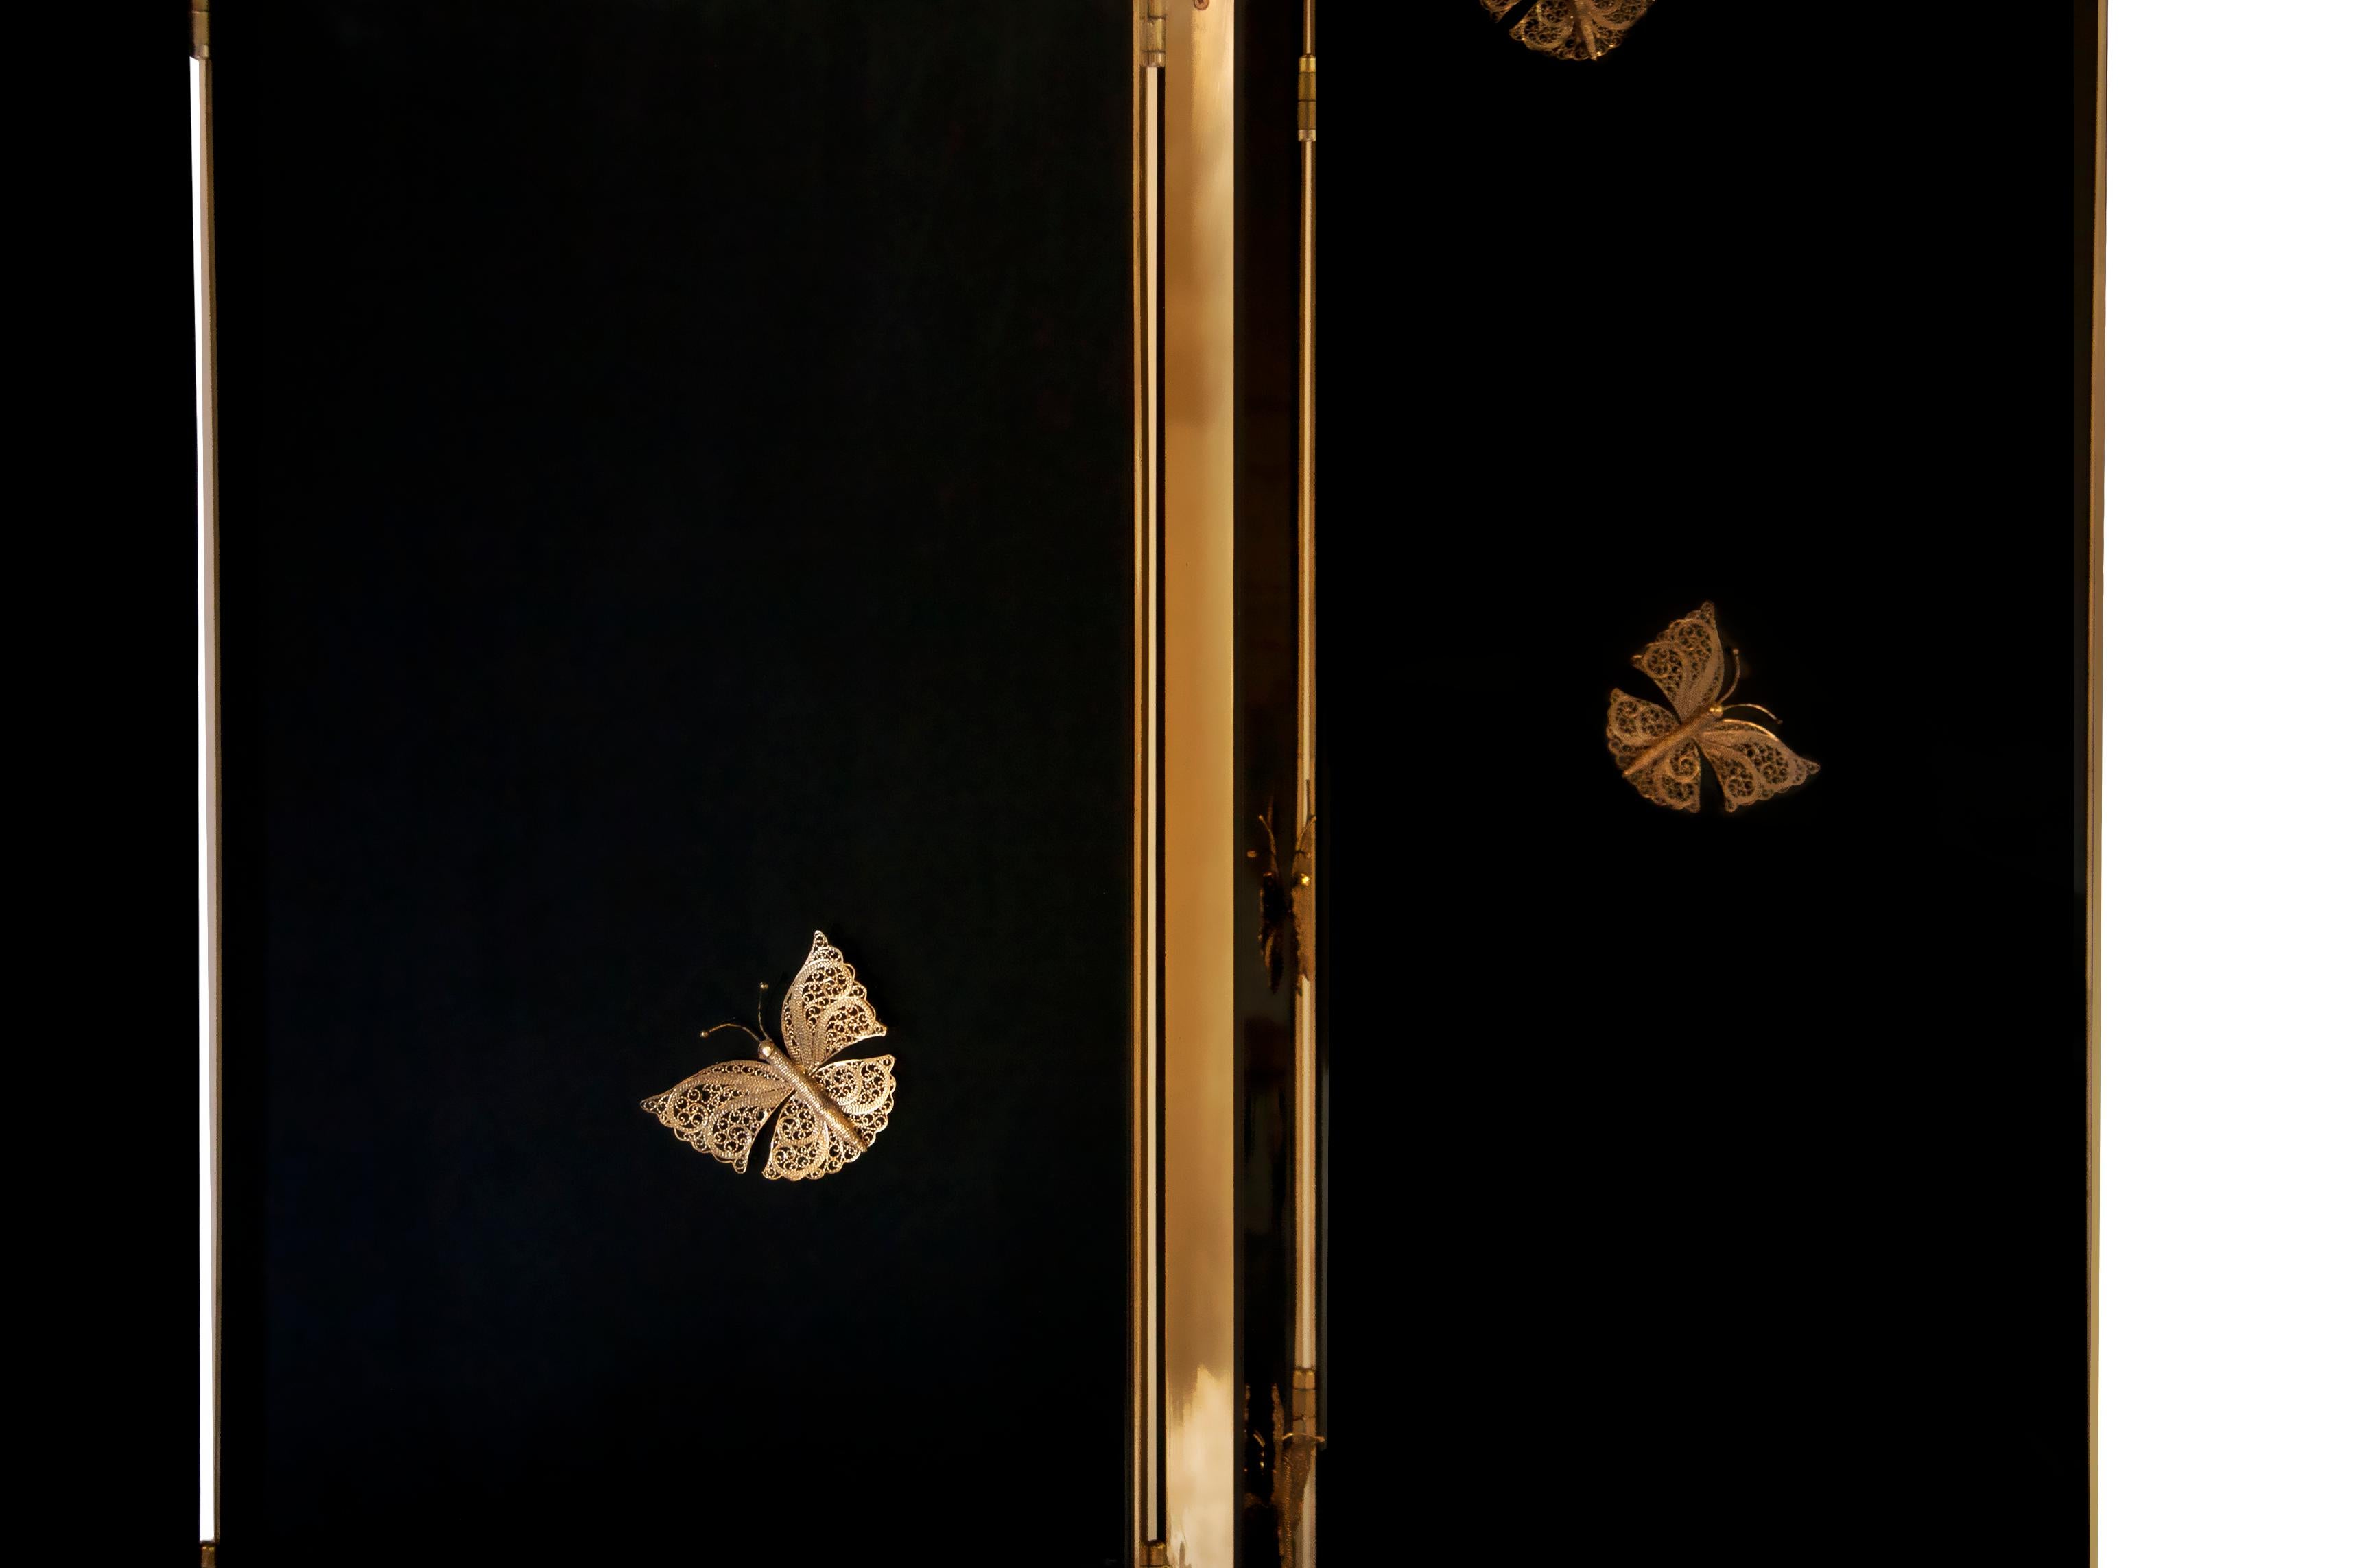 Fascinated with all things wild, from exotic wood textures to the delicate butterfly silhouettes, the intriguing Euphoria screen captures the mystic and seduction that lies behind the wings of a luxurious butterfly.

Panels: Black lacquer with high